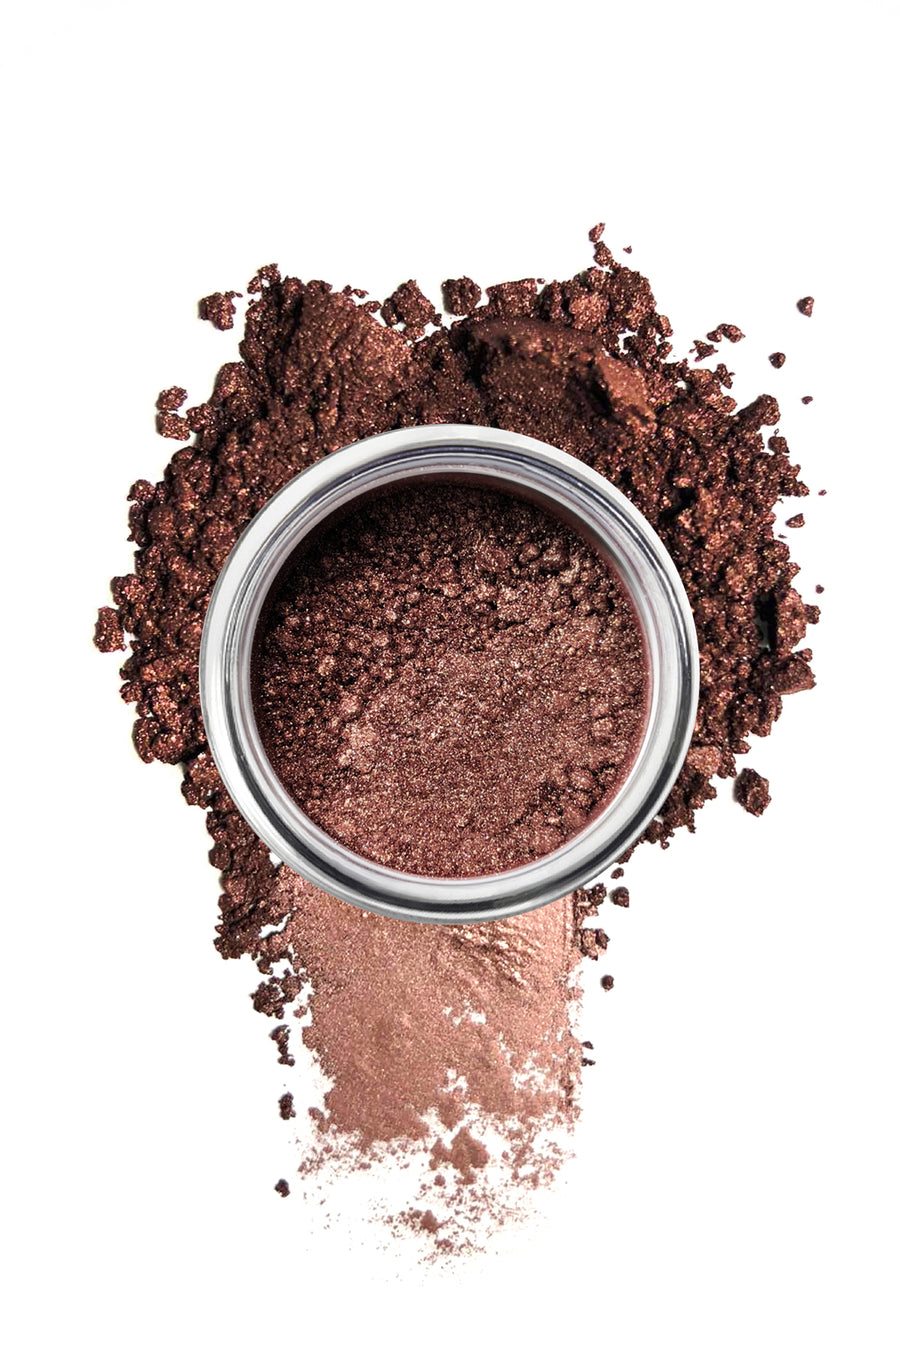 Shimmer Eyeshadow #19 - Rose Brown - Blend Mineral Cosmetics